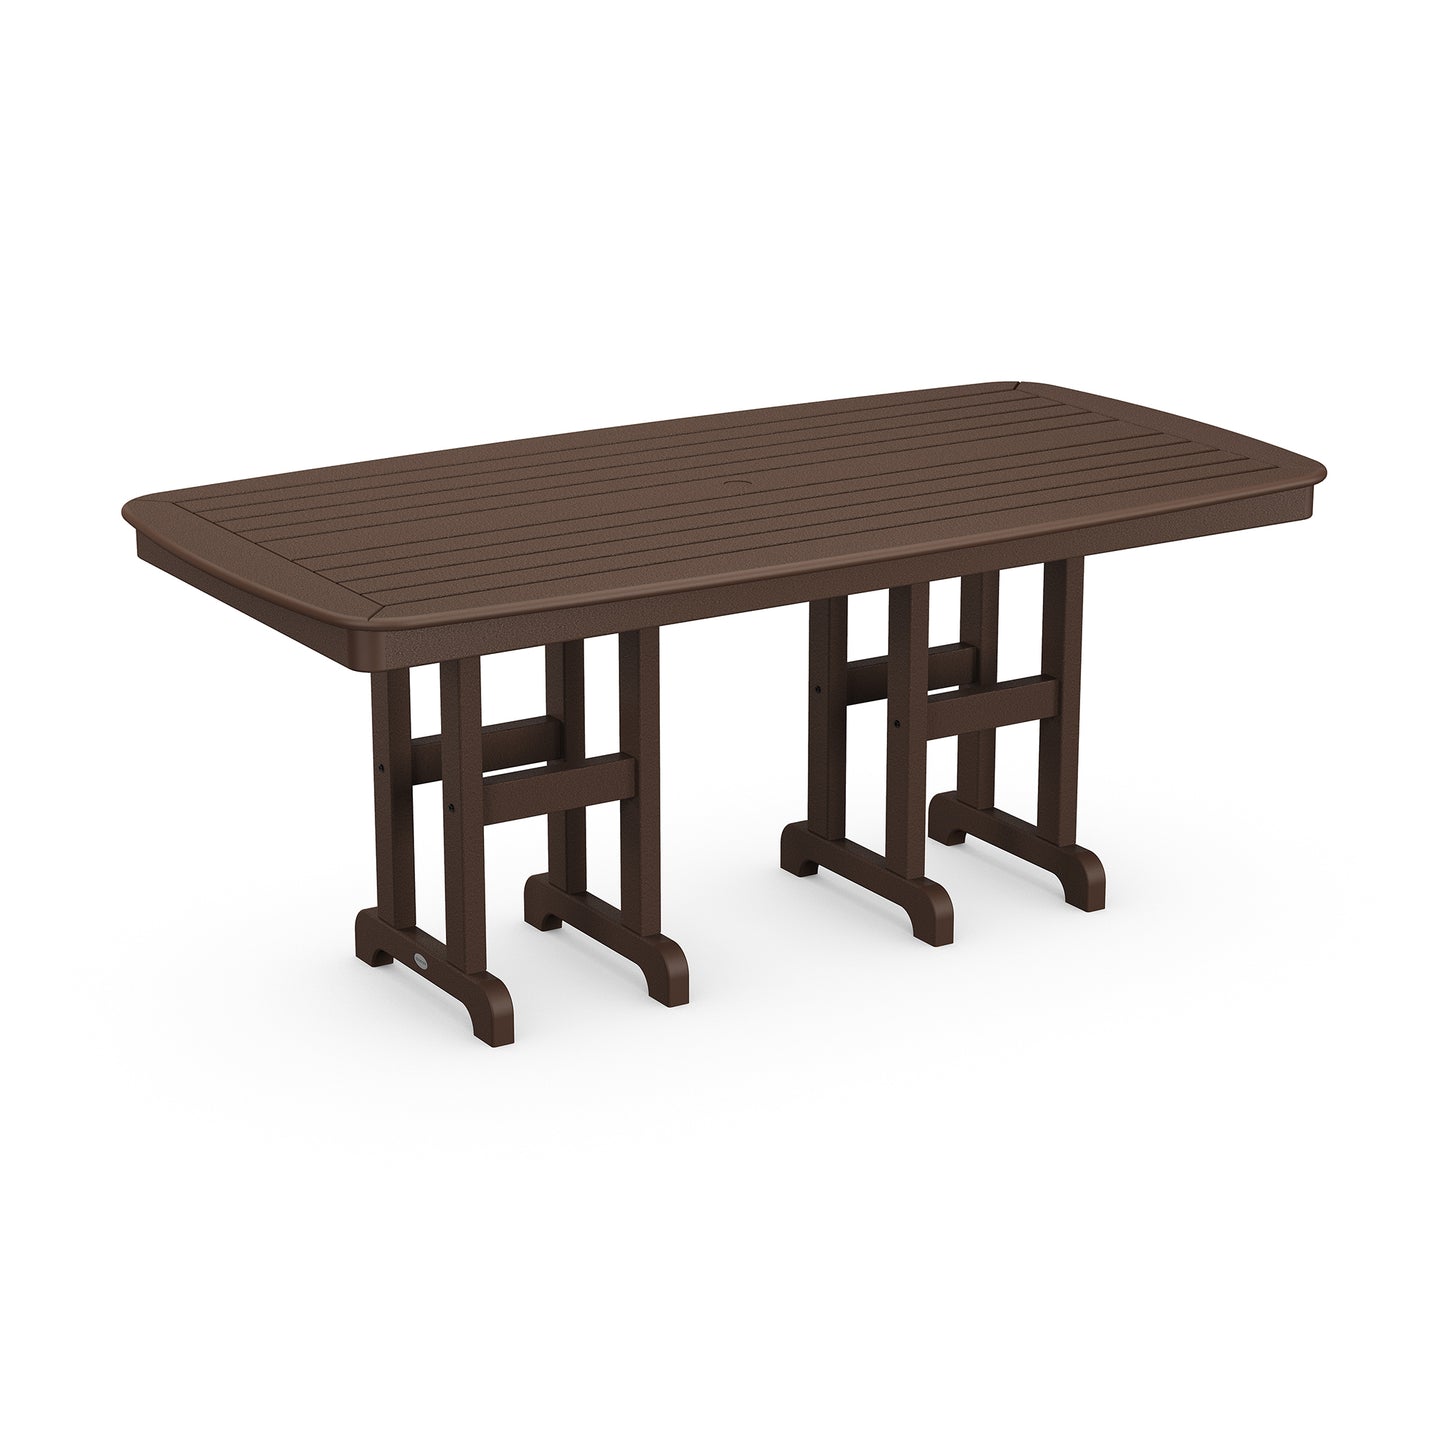 A rectangular brown POLYWOOD Nautical 37" x 72" dining table with attached benches on both sides, set against a white background. The table and benches feature a slatted design.